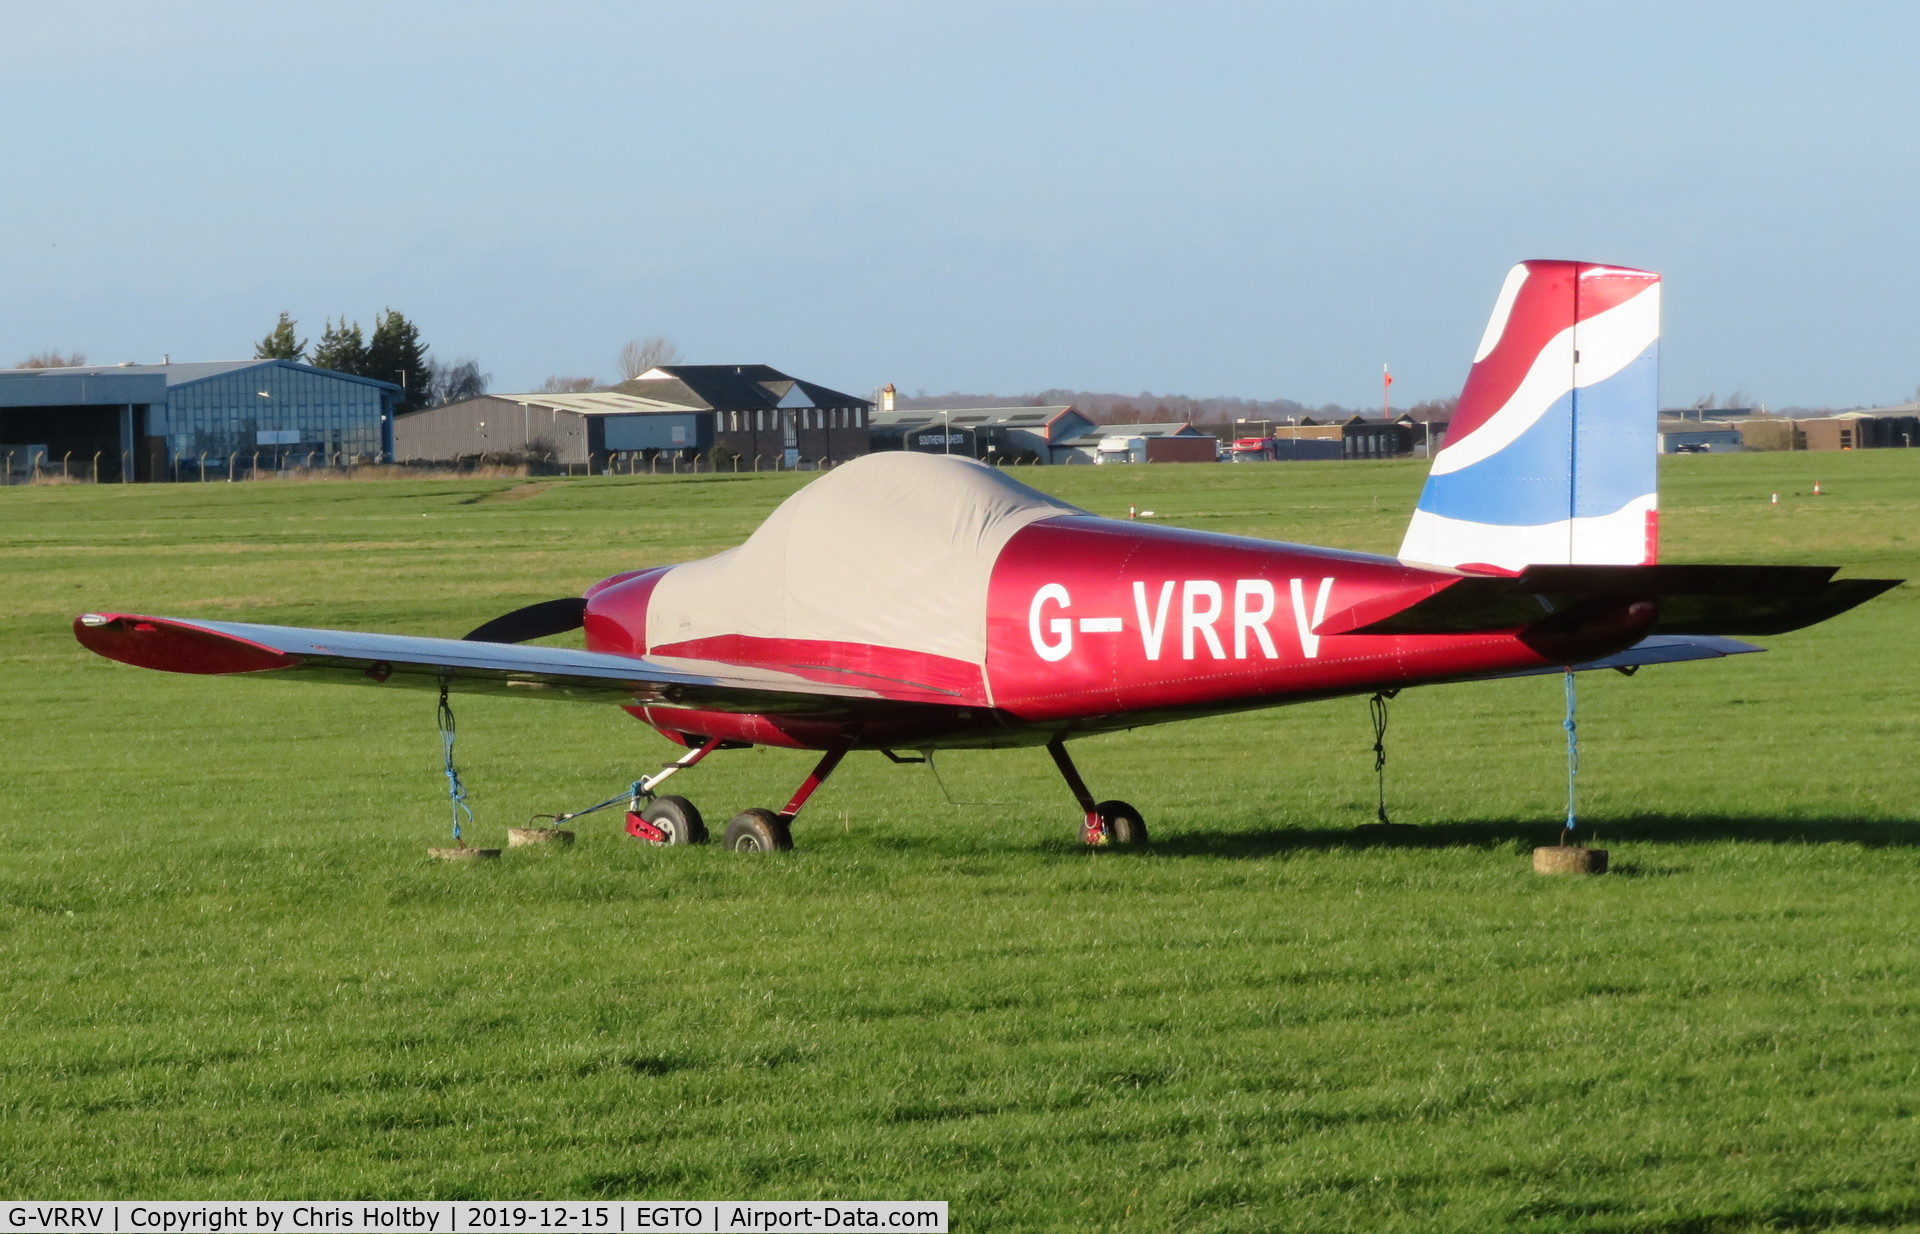 G-VRRV, 2017 Vans RV-12 C/N LAA 363-15322, Parked and covered at Rochester Airport, Kent